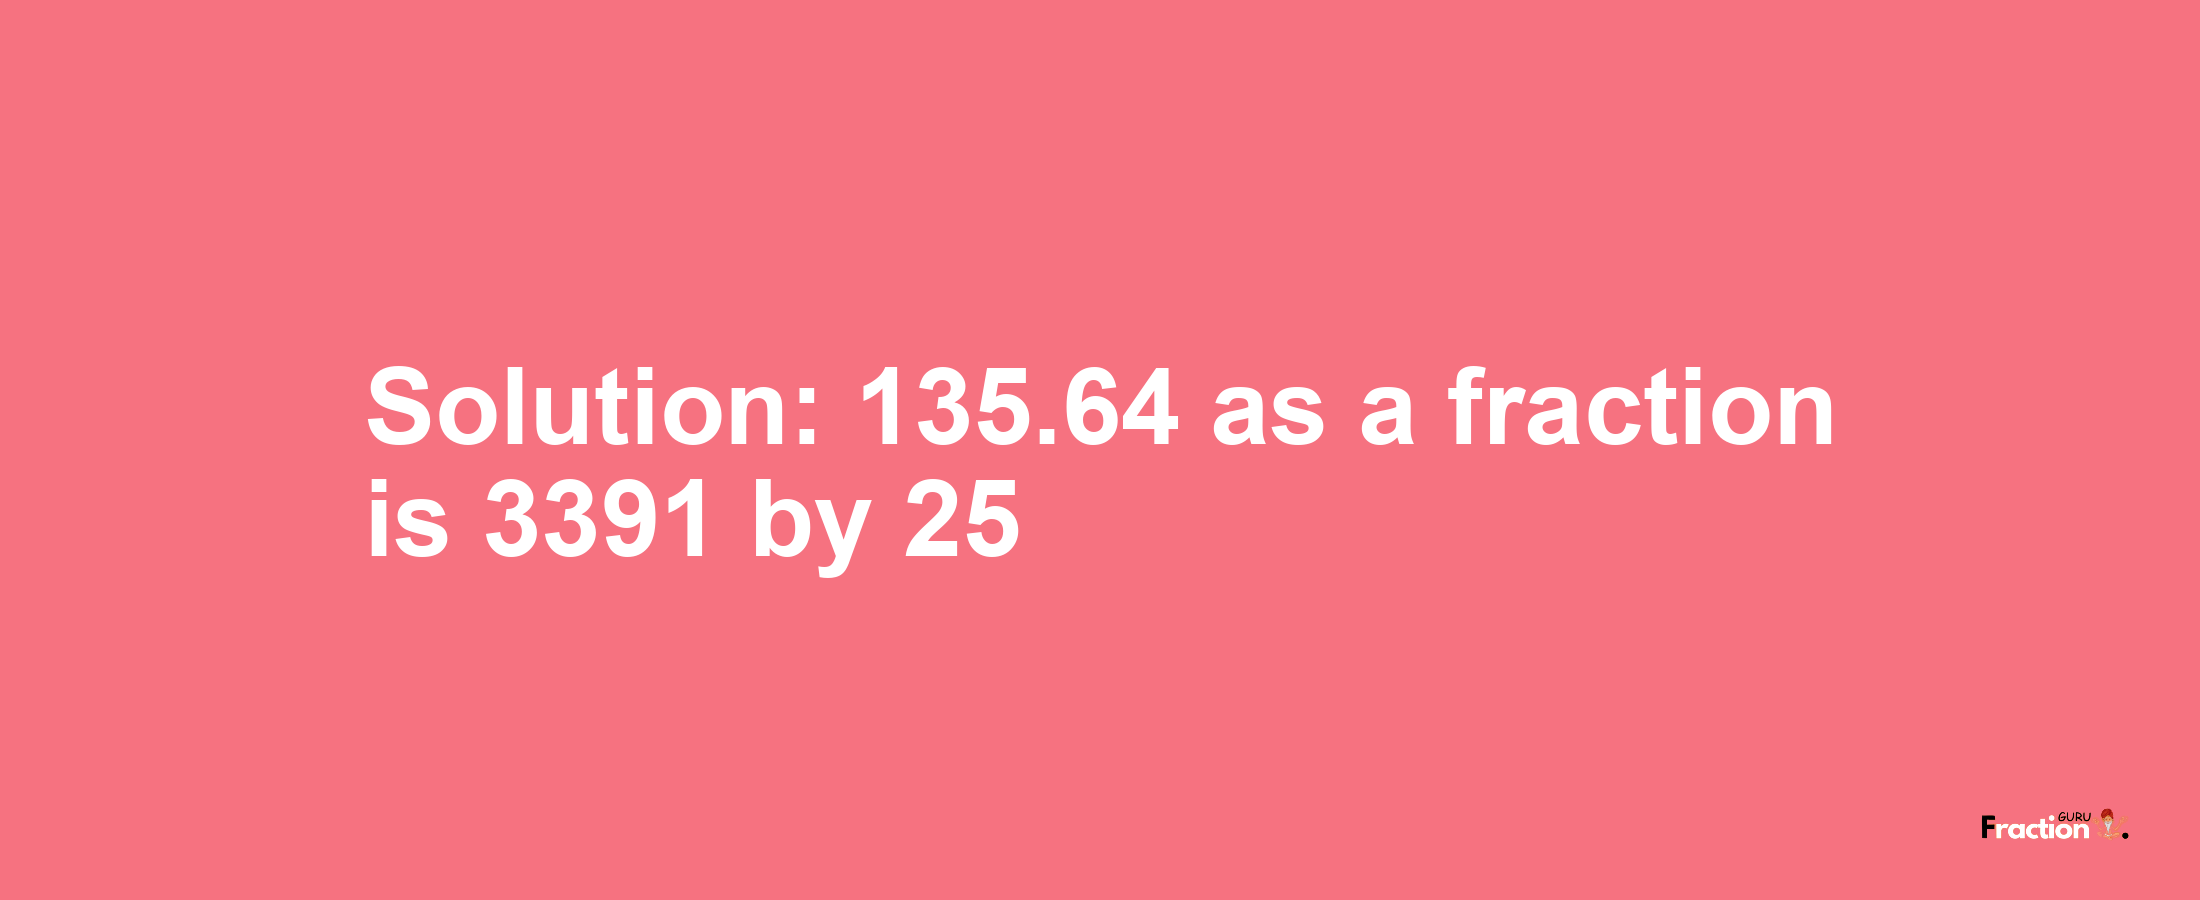 Solution:135.64 as a fraction is 3391/25